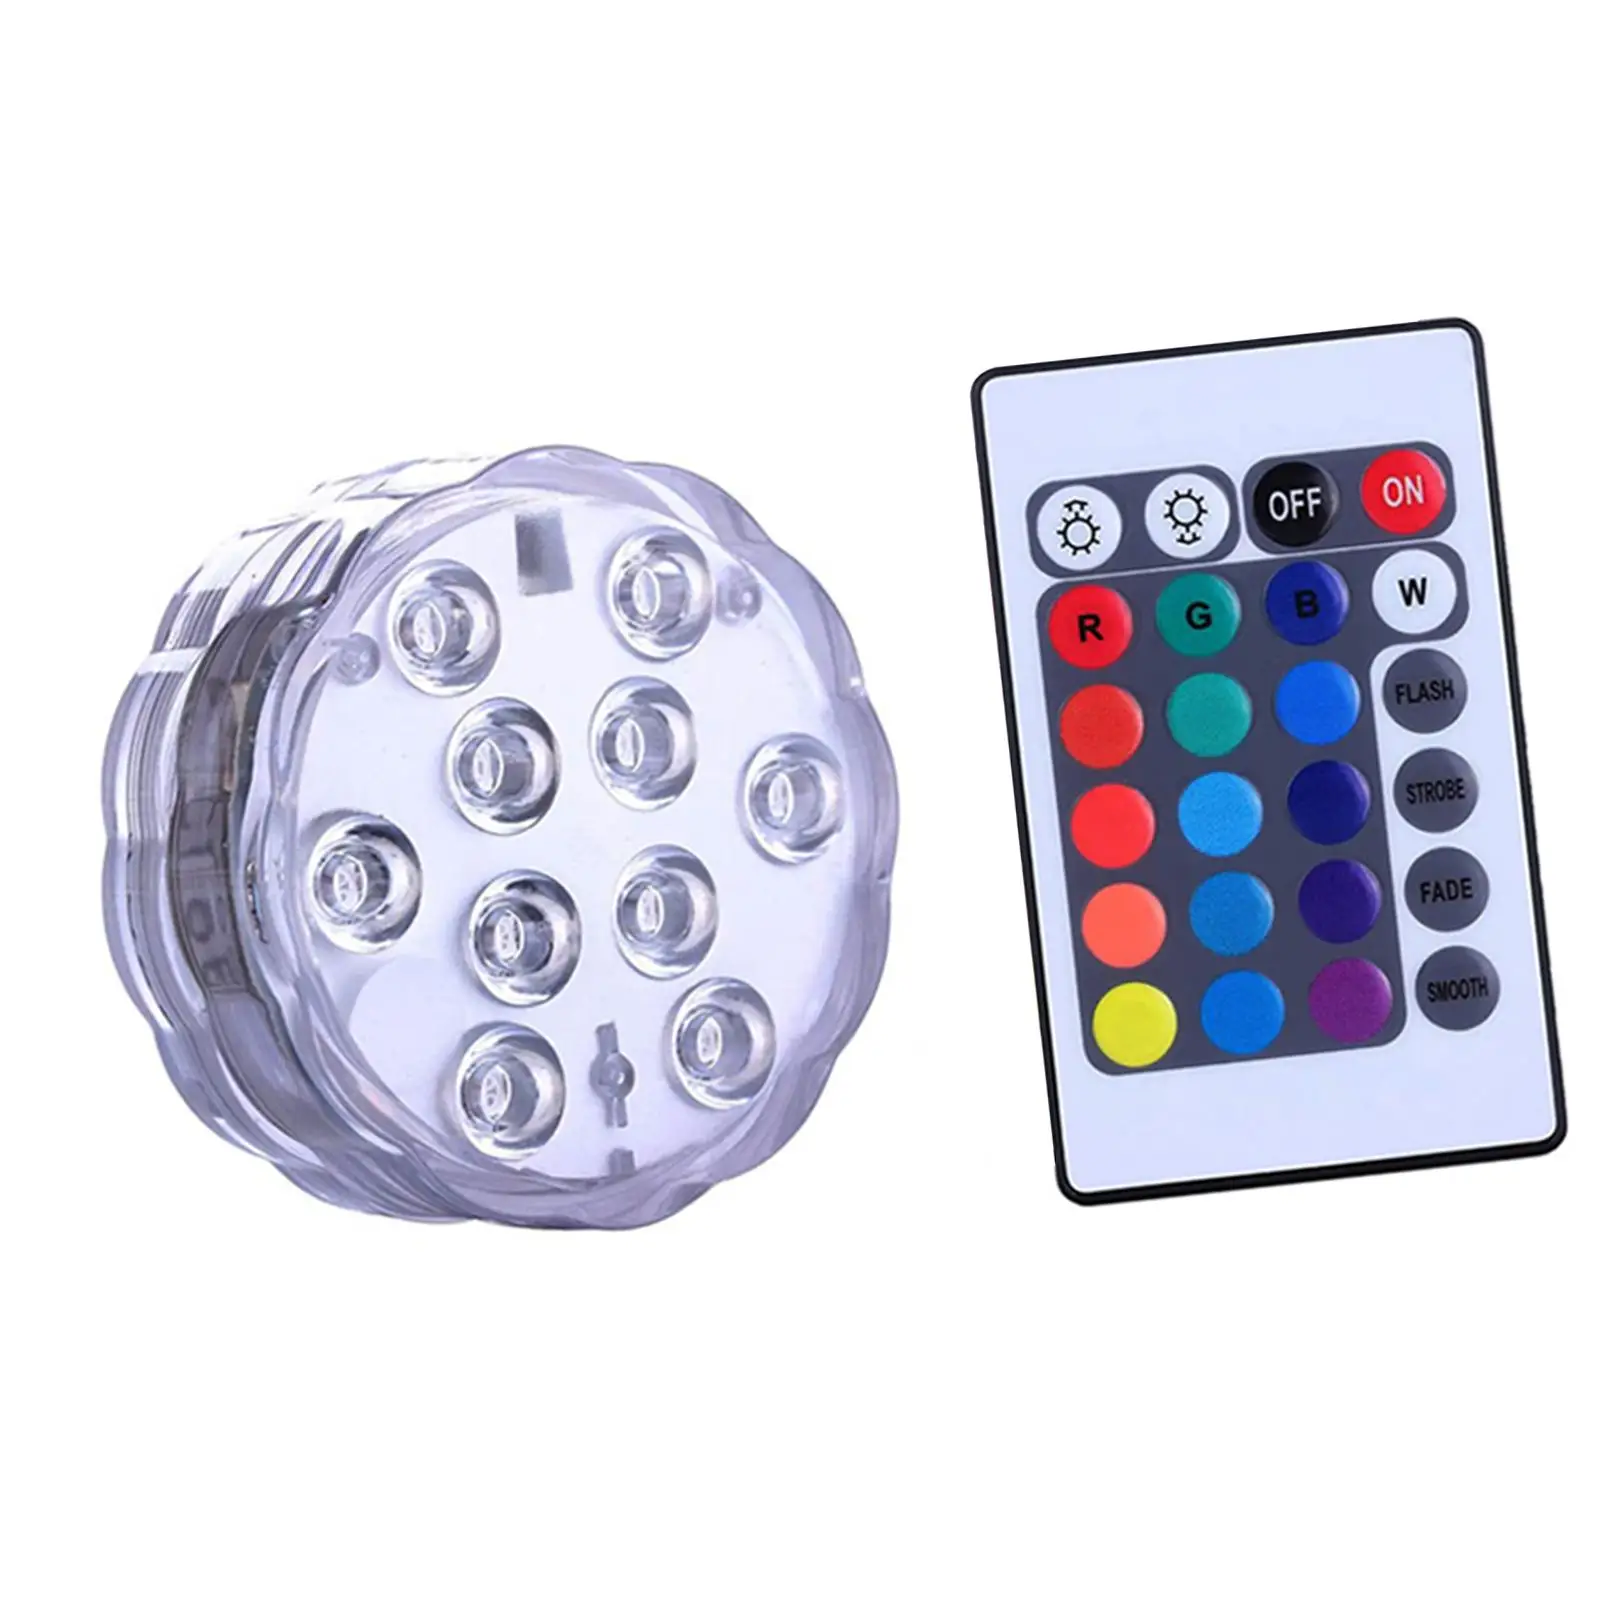 Submersible LED Lights with Remote Tea Light Night Lamp IP68 Waterproof RGB Multicolor for Pool Wedding Fish Tank Hot Tub Vase